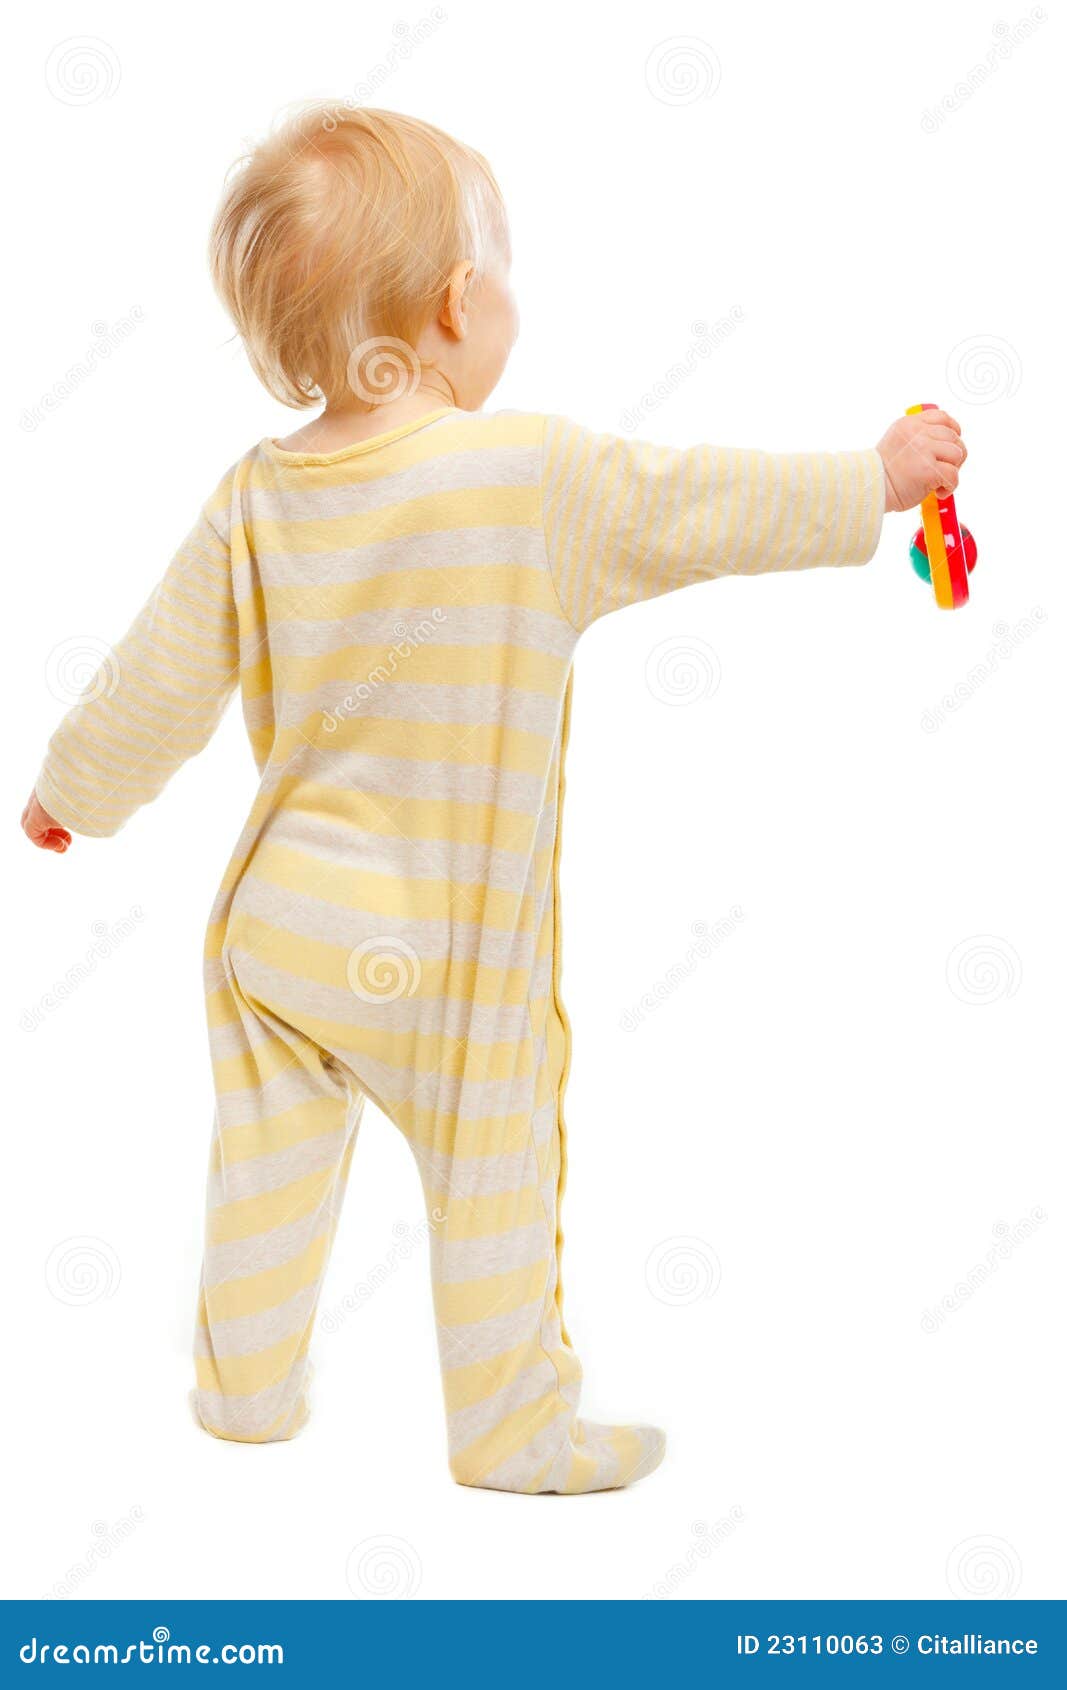 Baby Standing With Rattle Back To Camera Stock Image ...